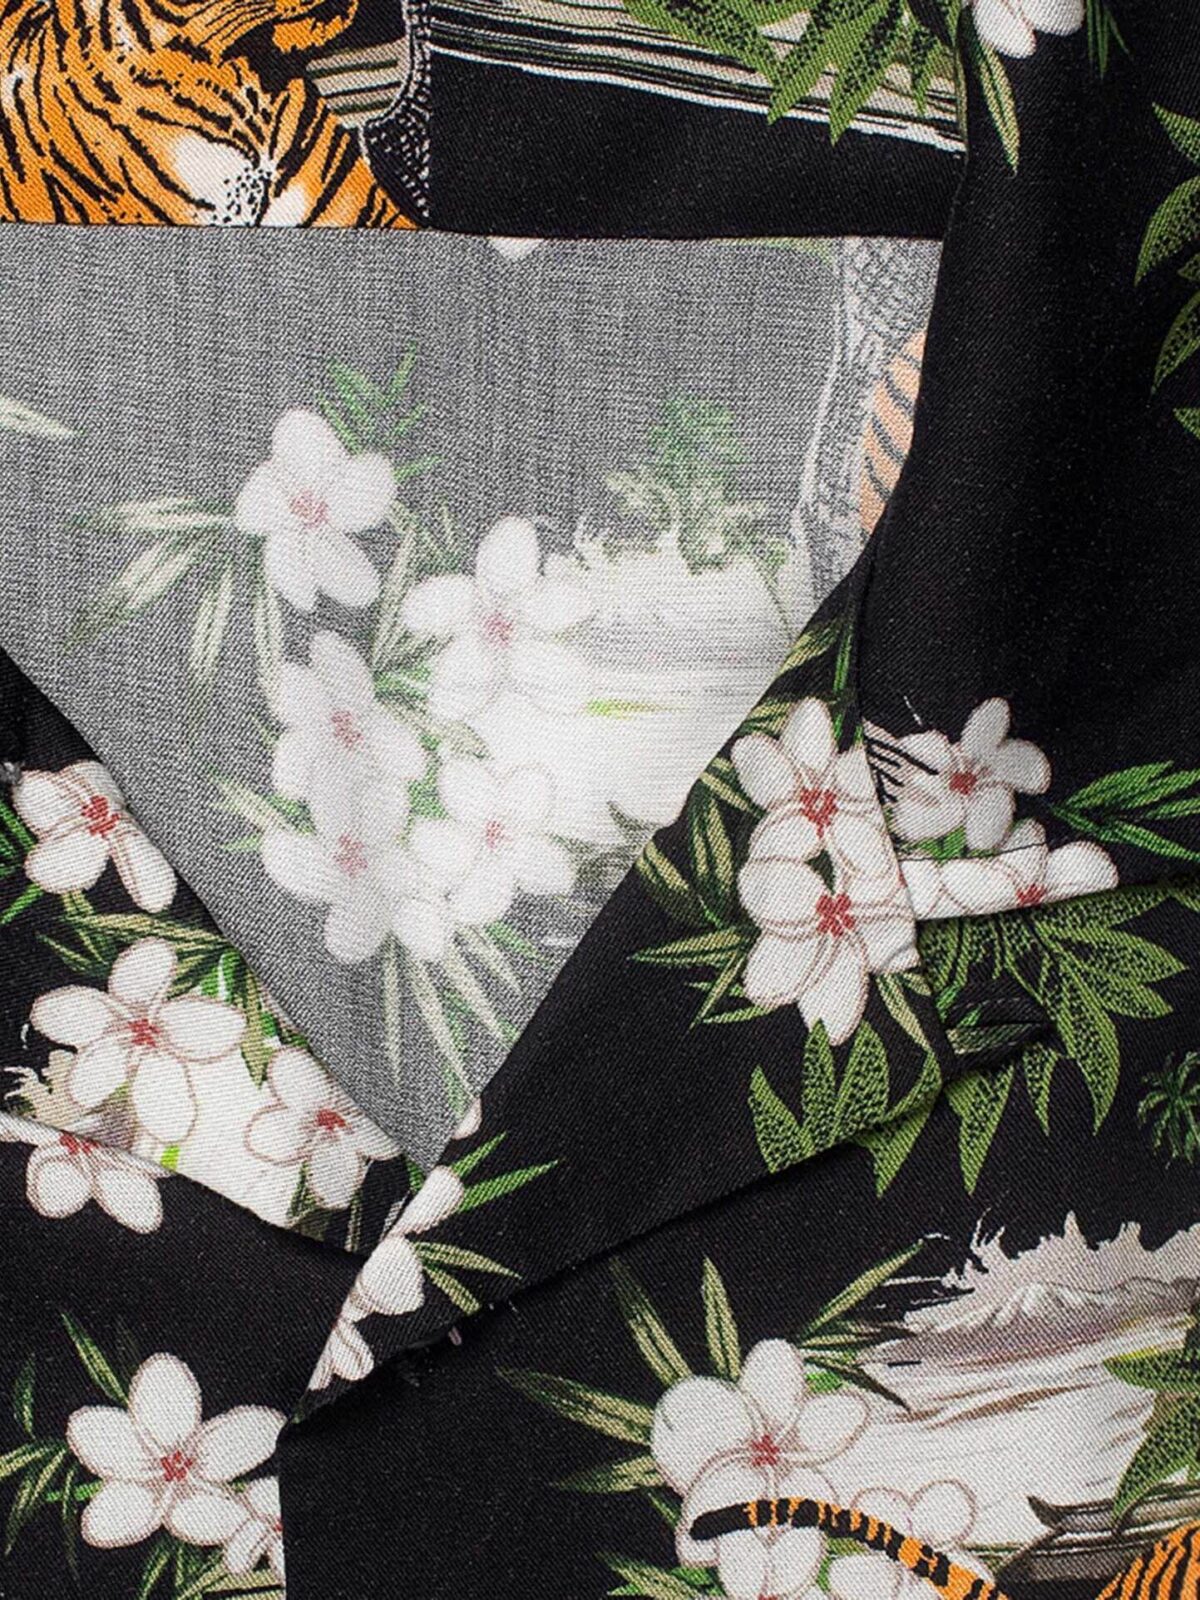 12 Pcs Embroidery Cloth White Embroidery Fabric Squares Reserve Cloth  Canvas Embroidery Cloth 14 Black Cloth Cotton Classic Reserve Embroidery  Fabric